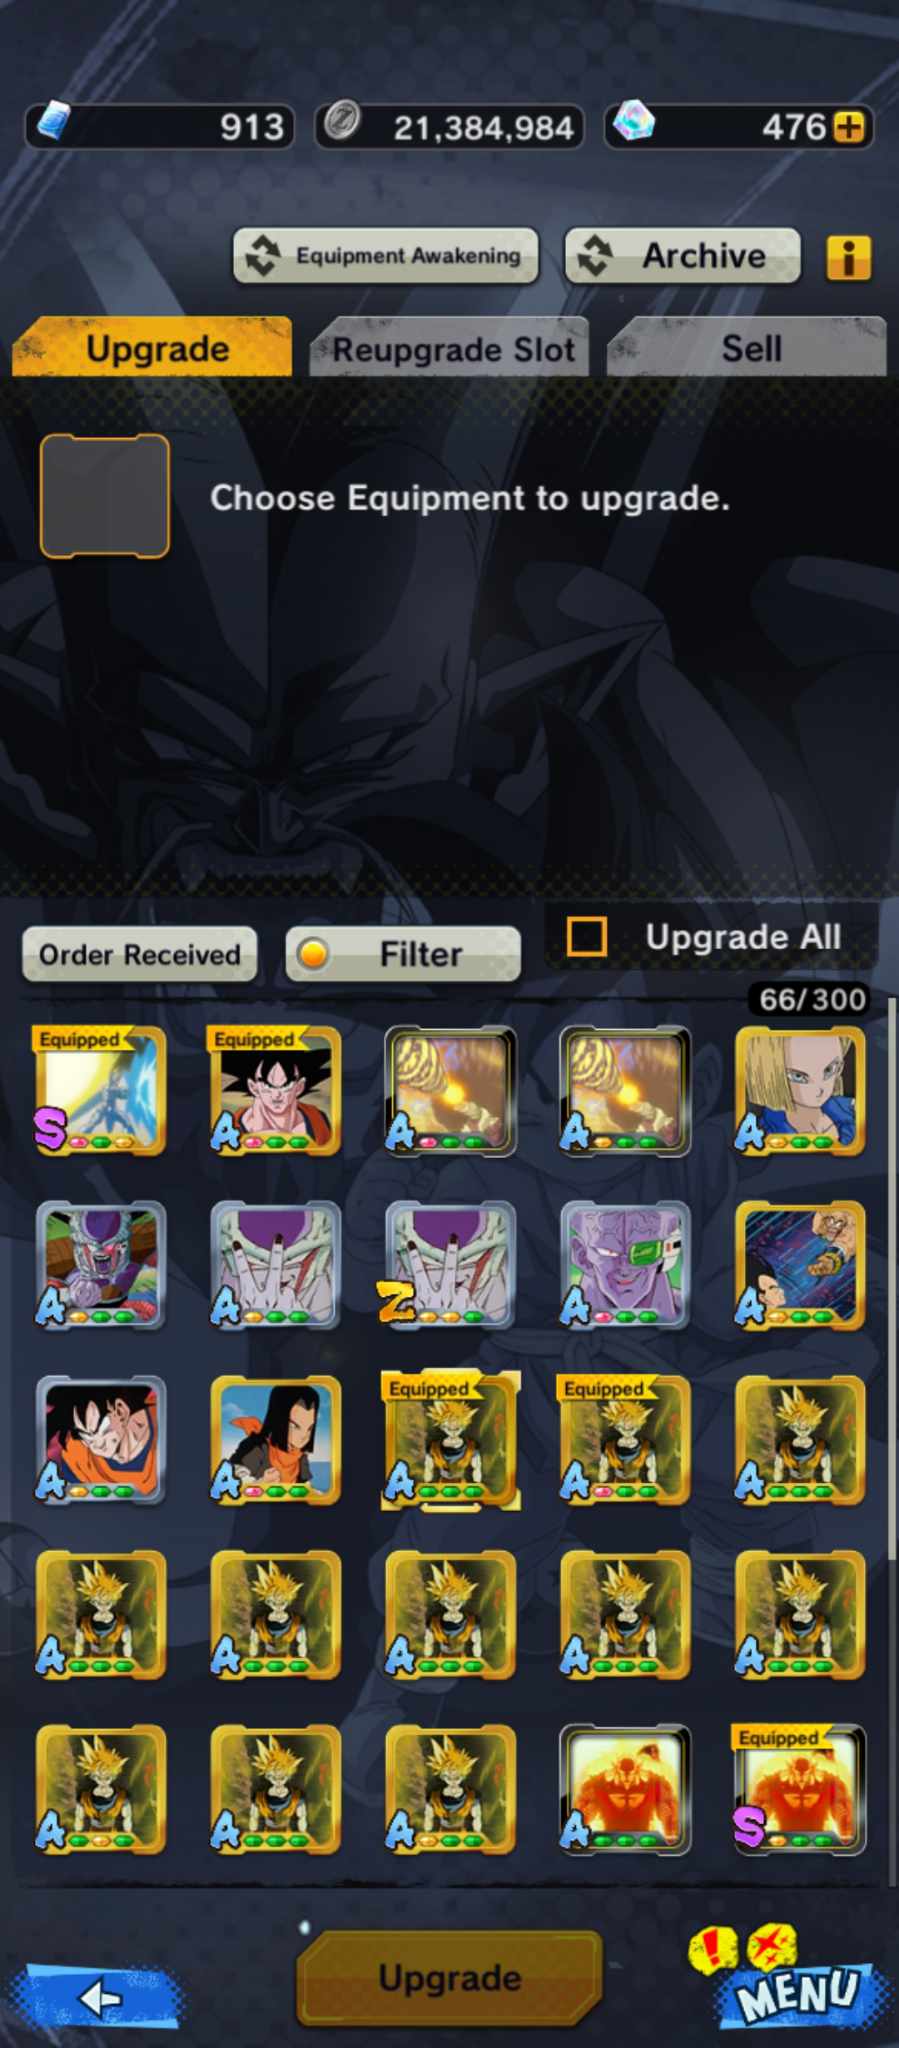 ANDROID-Proxios, LOGIN BANDAI-28 legend limited Goku V2, Goku V2, Goku Kid V4, Goku Kid V4,..)